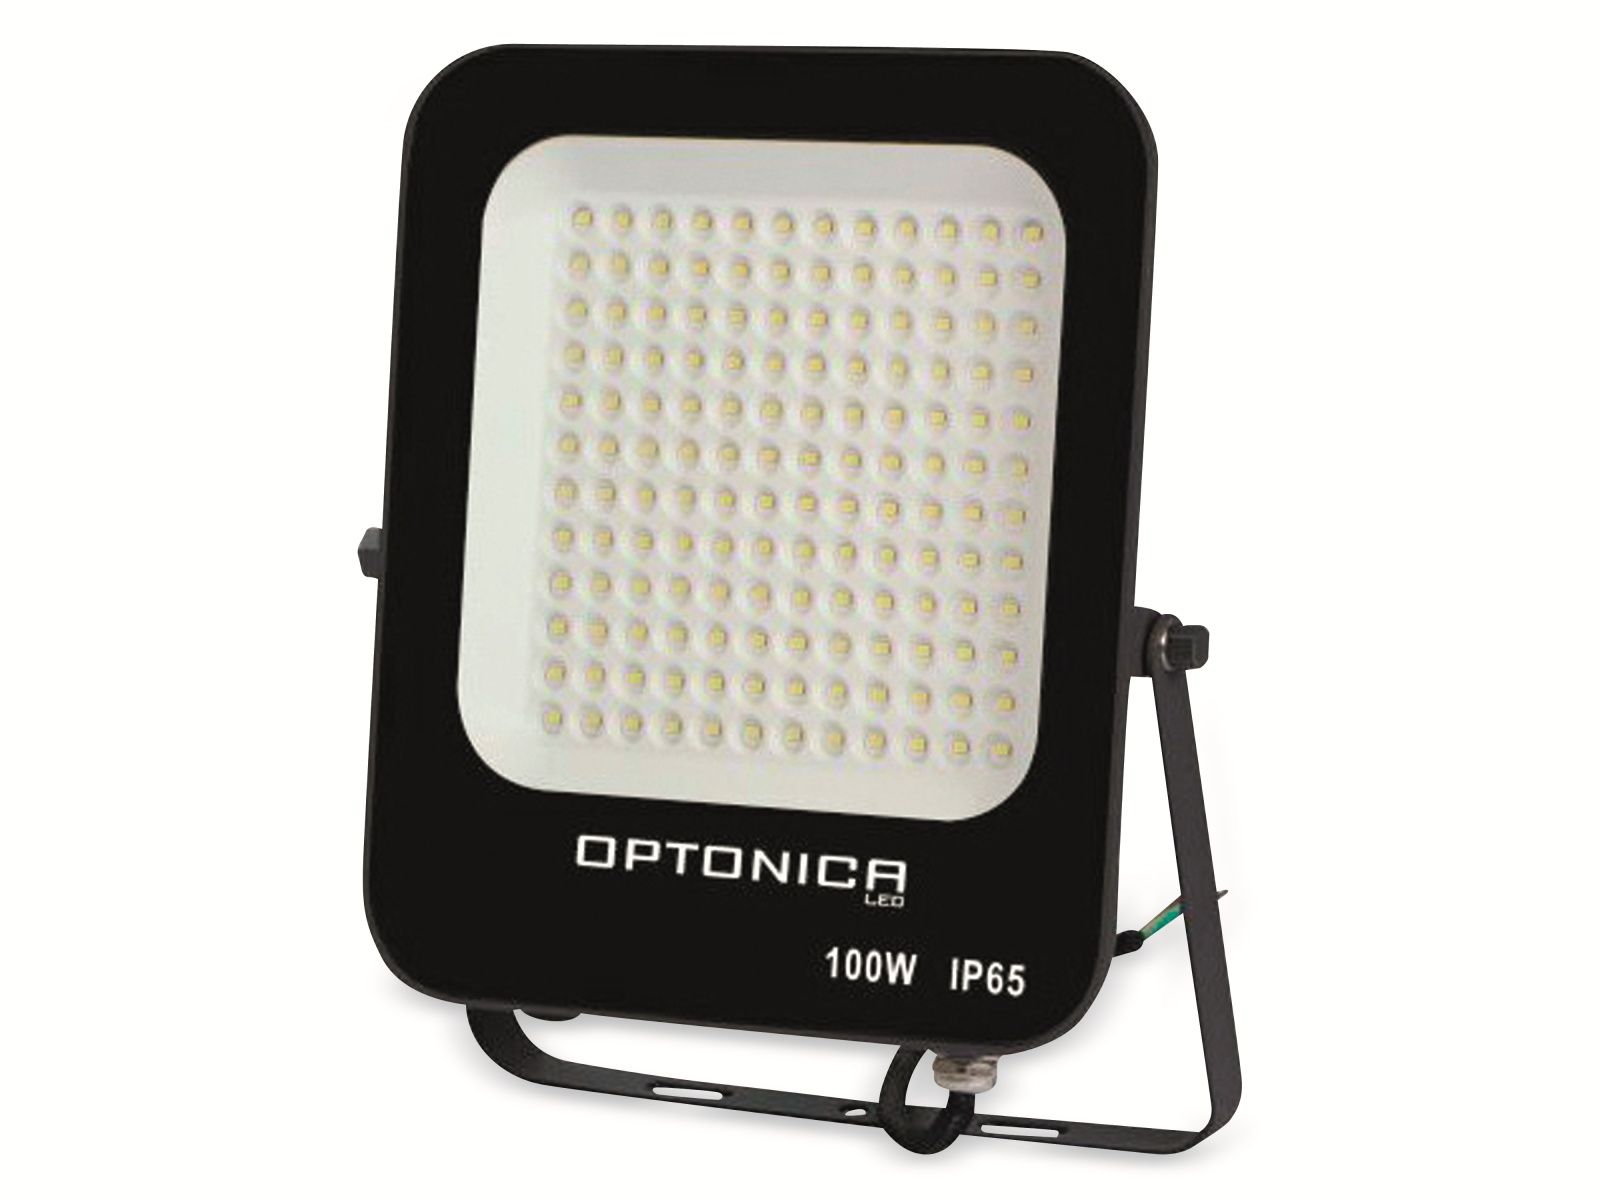 OPTONICA LED-Fluter, 100 W, 9000 lm, IP65, 6000 K von Optonica